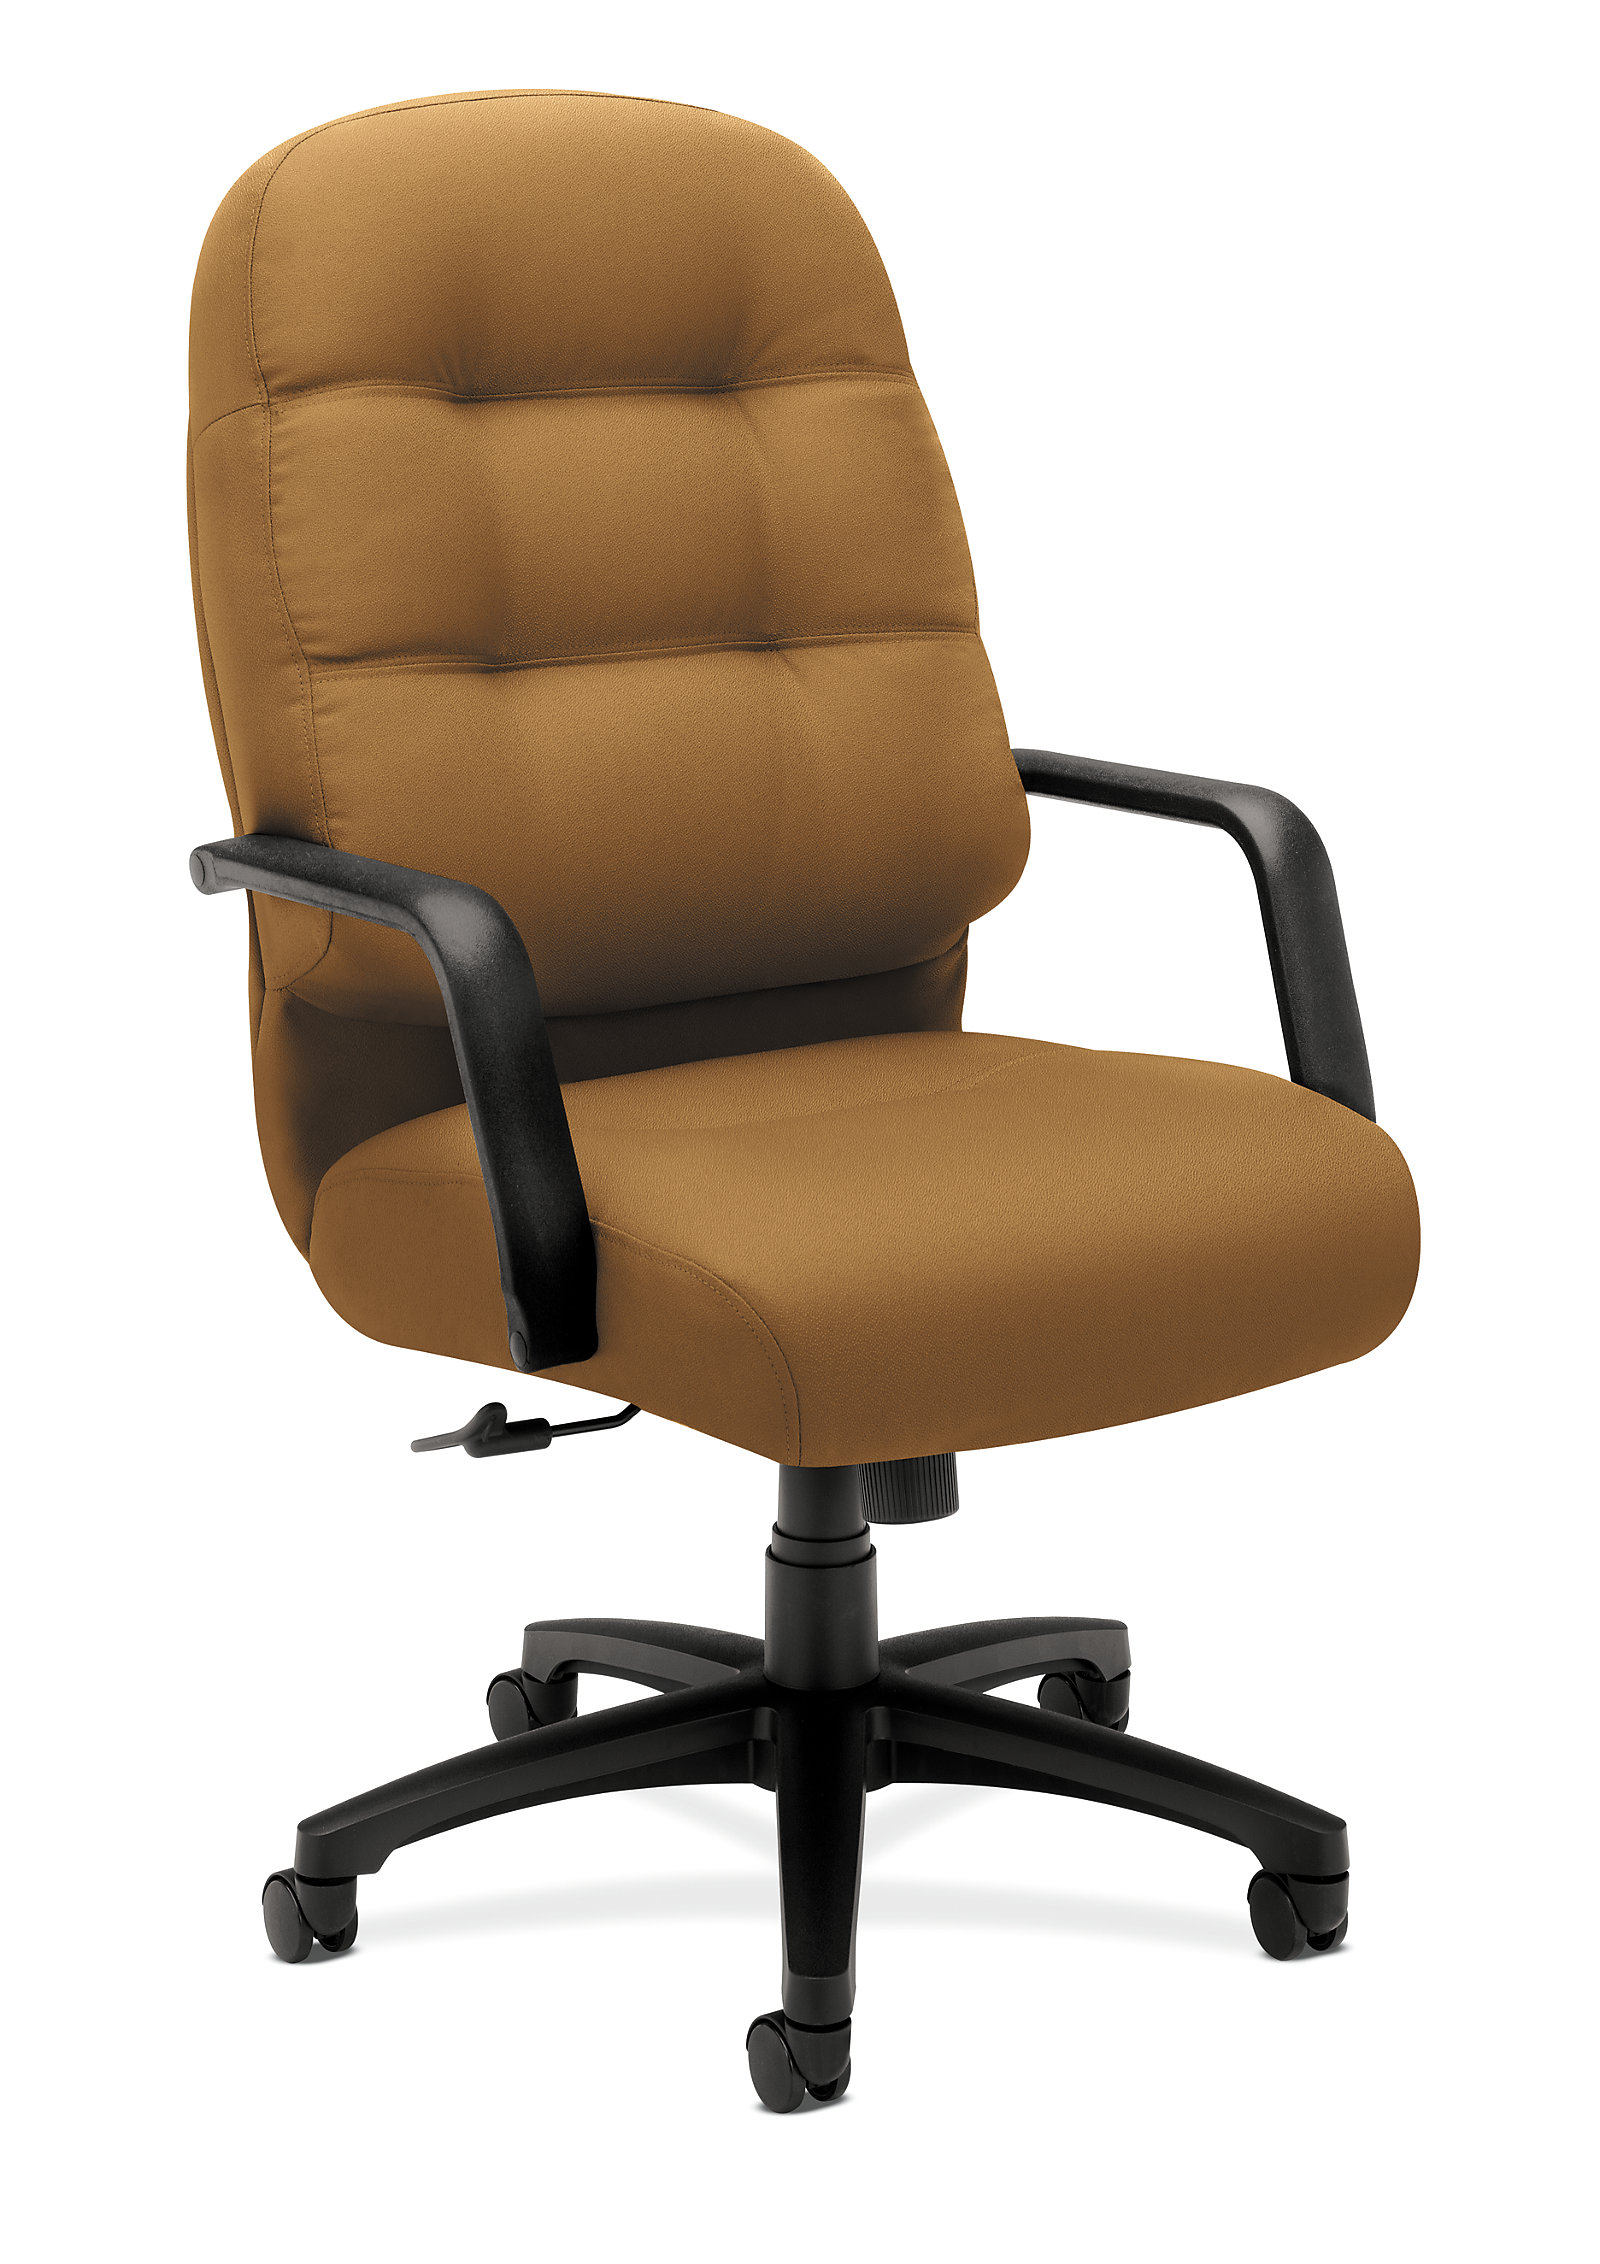 Executive High-Back Chair-H2091-image